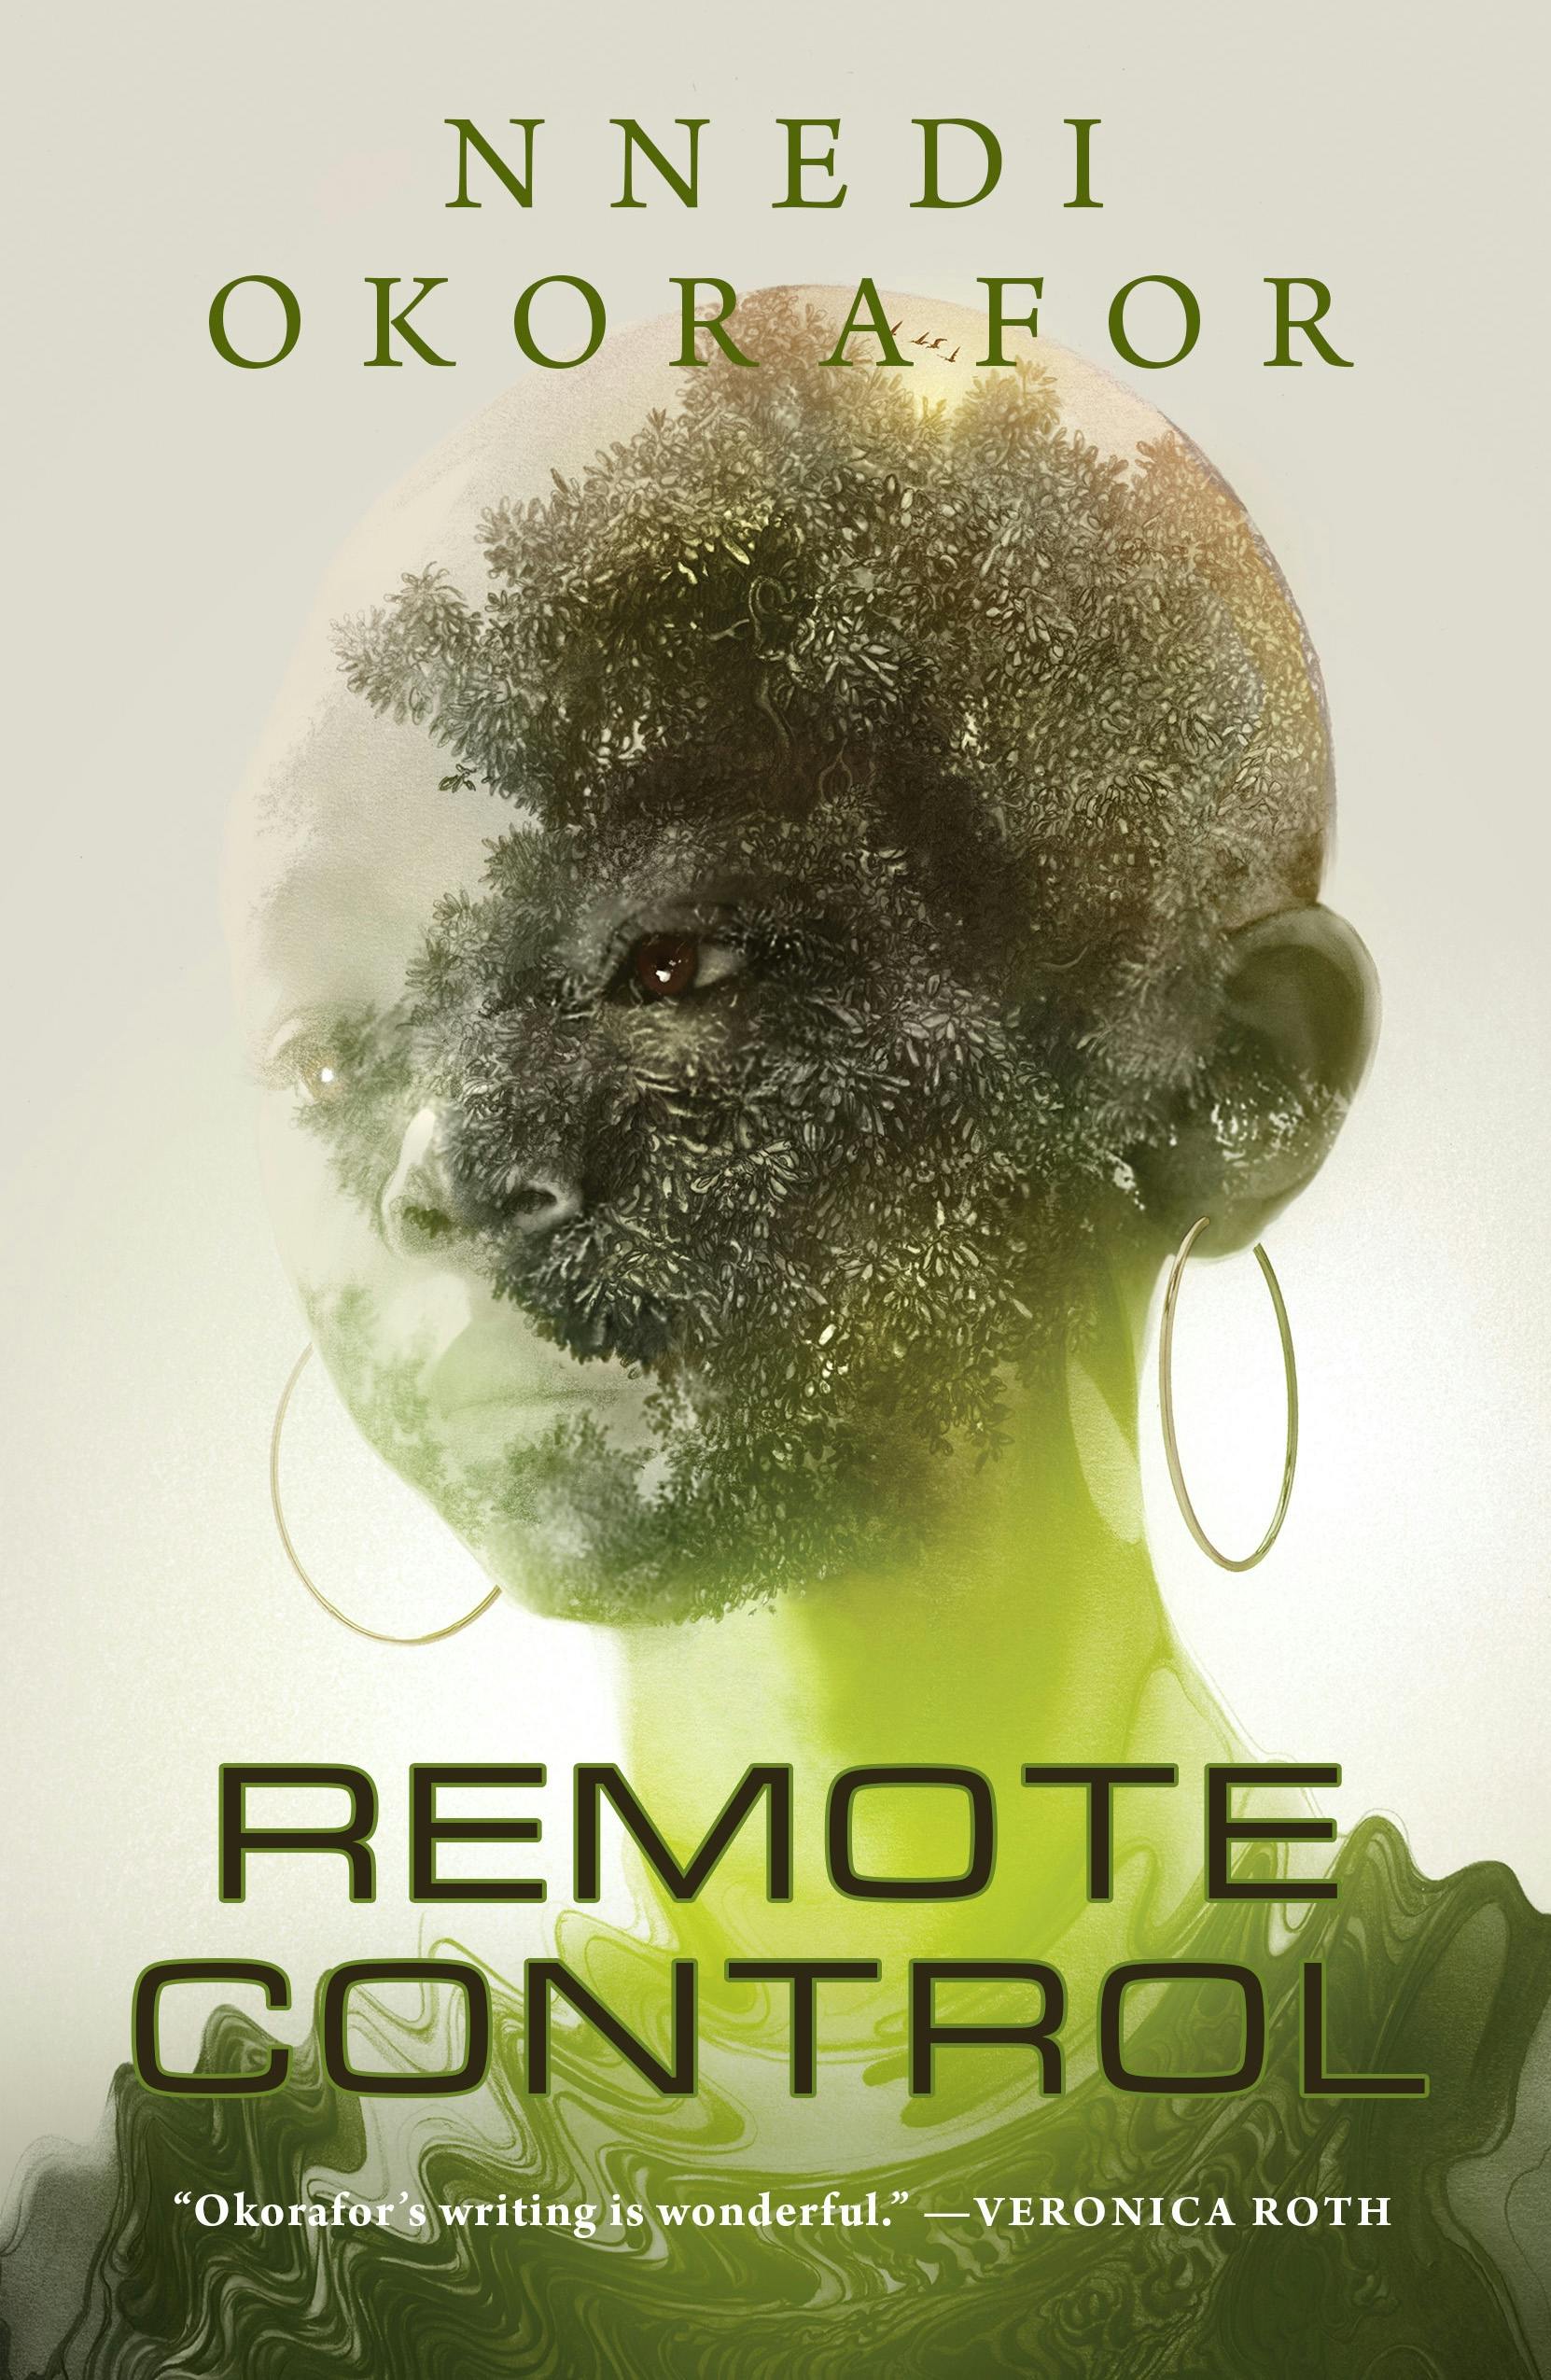 Cover for the book titled as: Remote Control